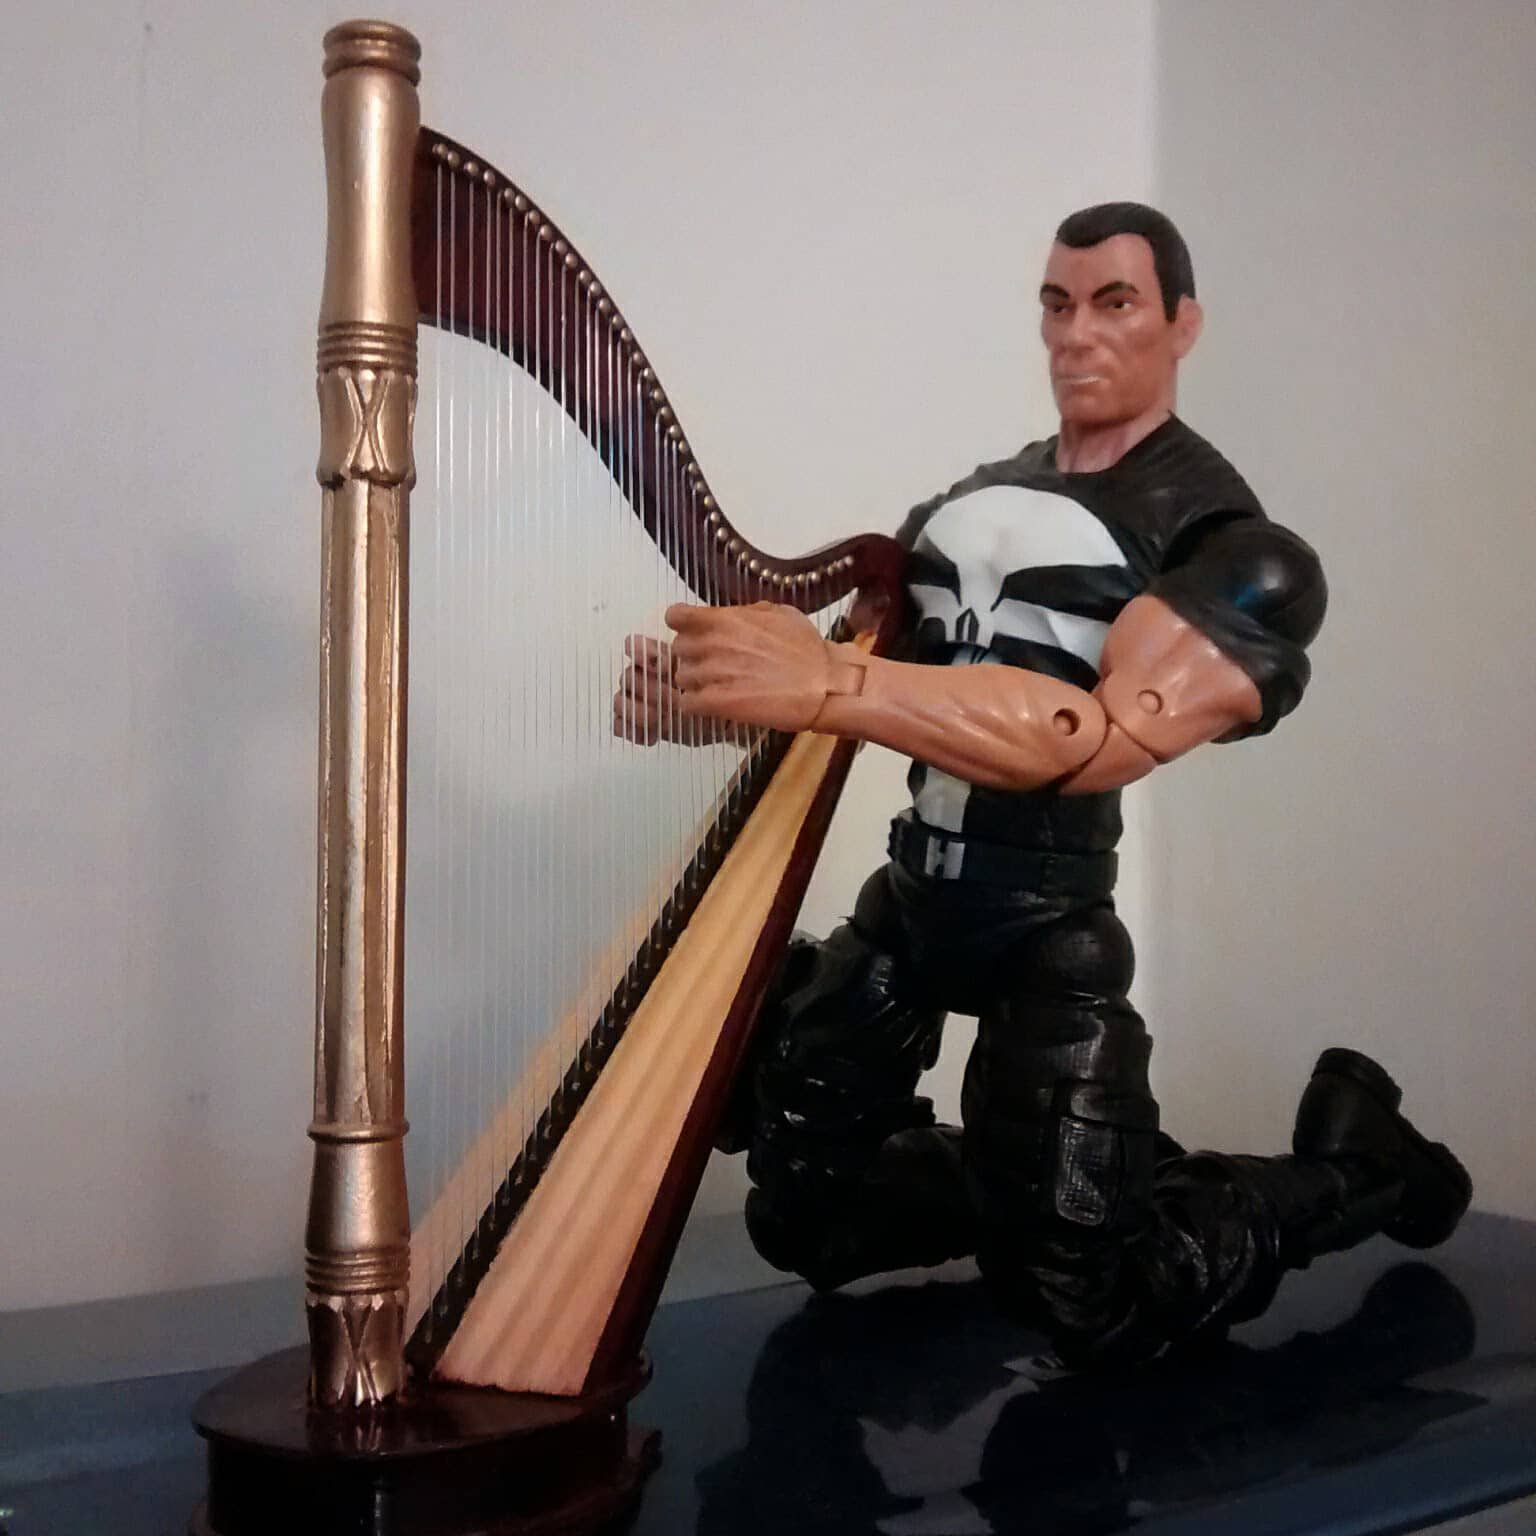 When he first tried the 9'' harp.